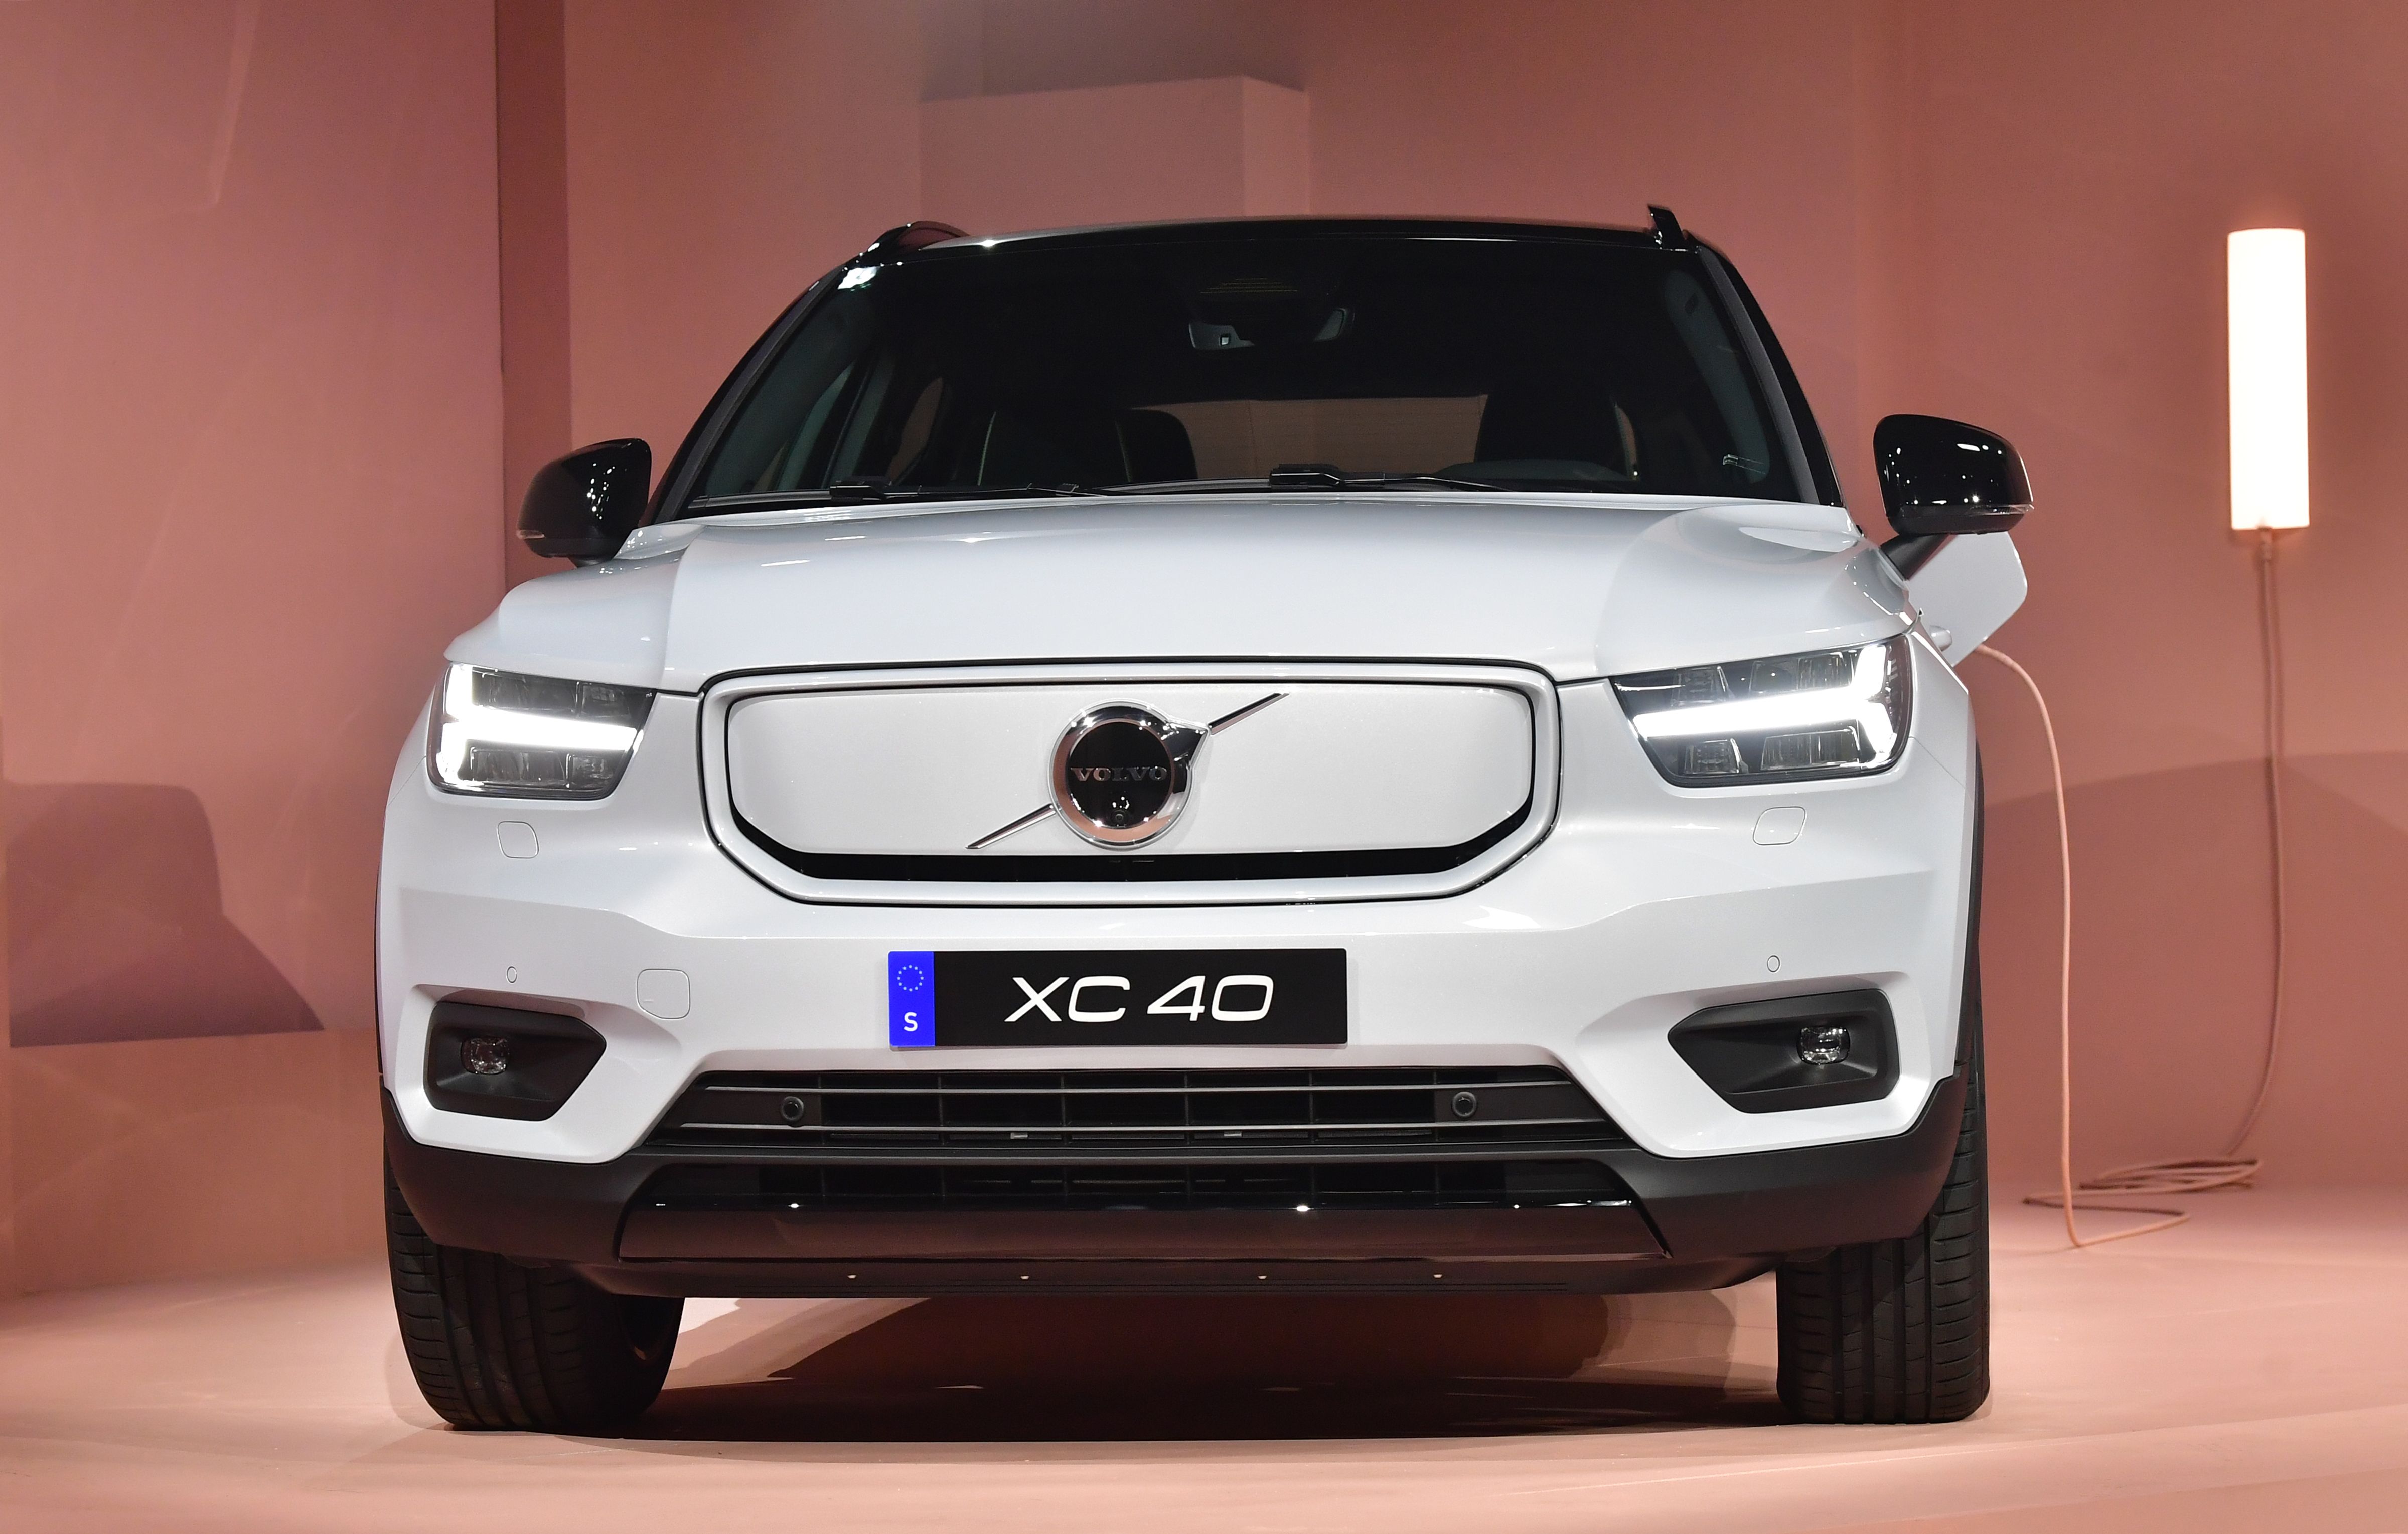 A white Volvo XC40 on display